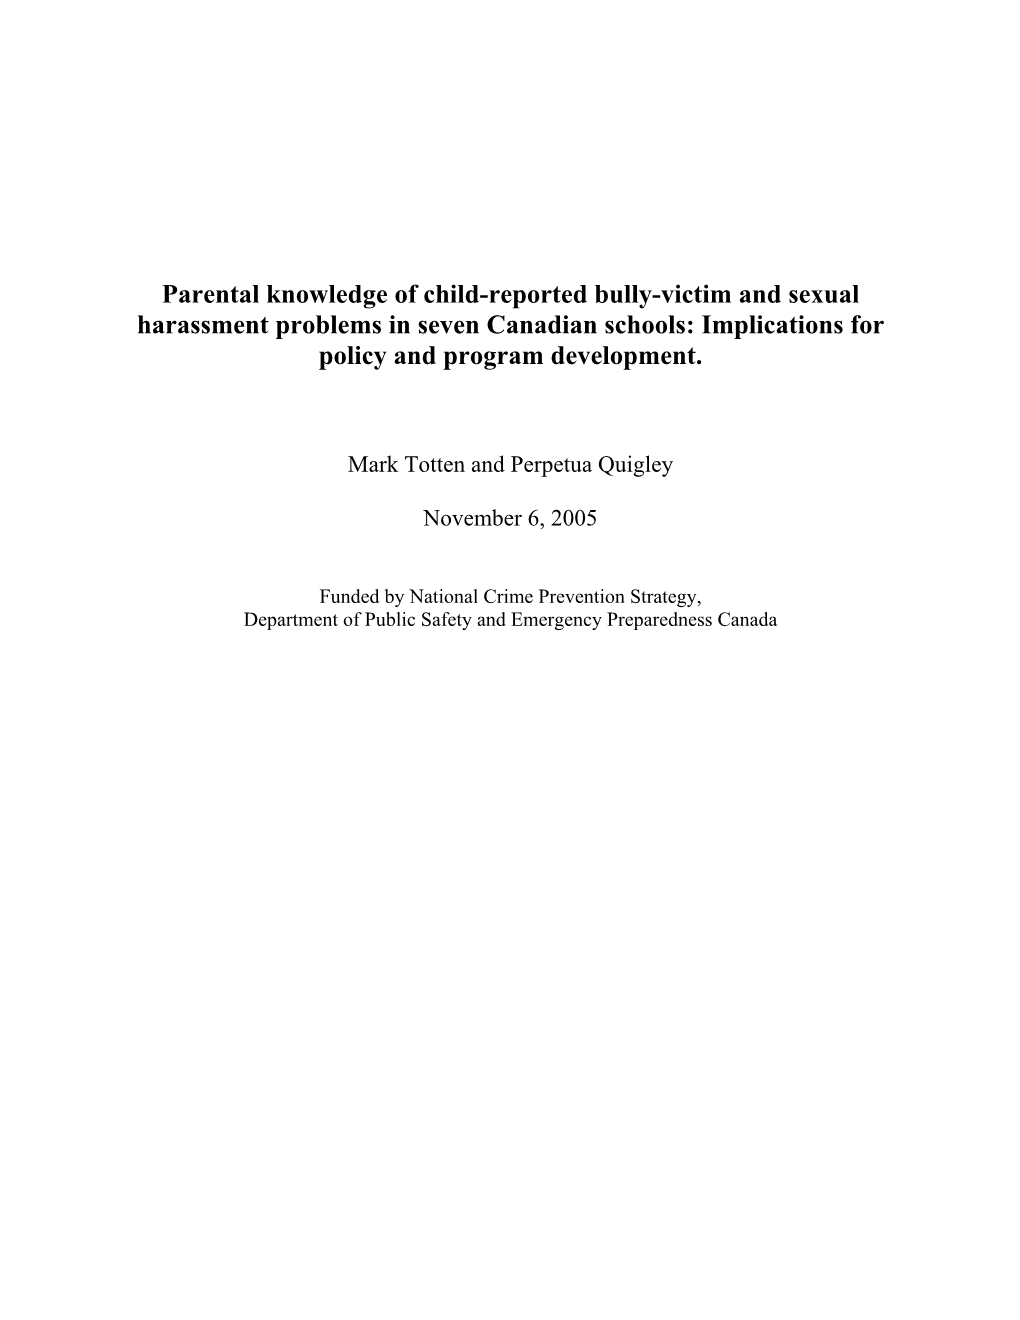 Parental Knowledge of Child-Reported Bully-Victim and Sexual Harassment Problems in Seven Canadian Schools: Implications for Policy and Program Development